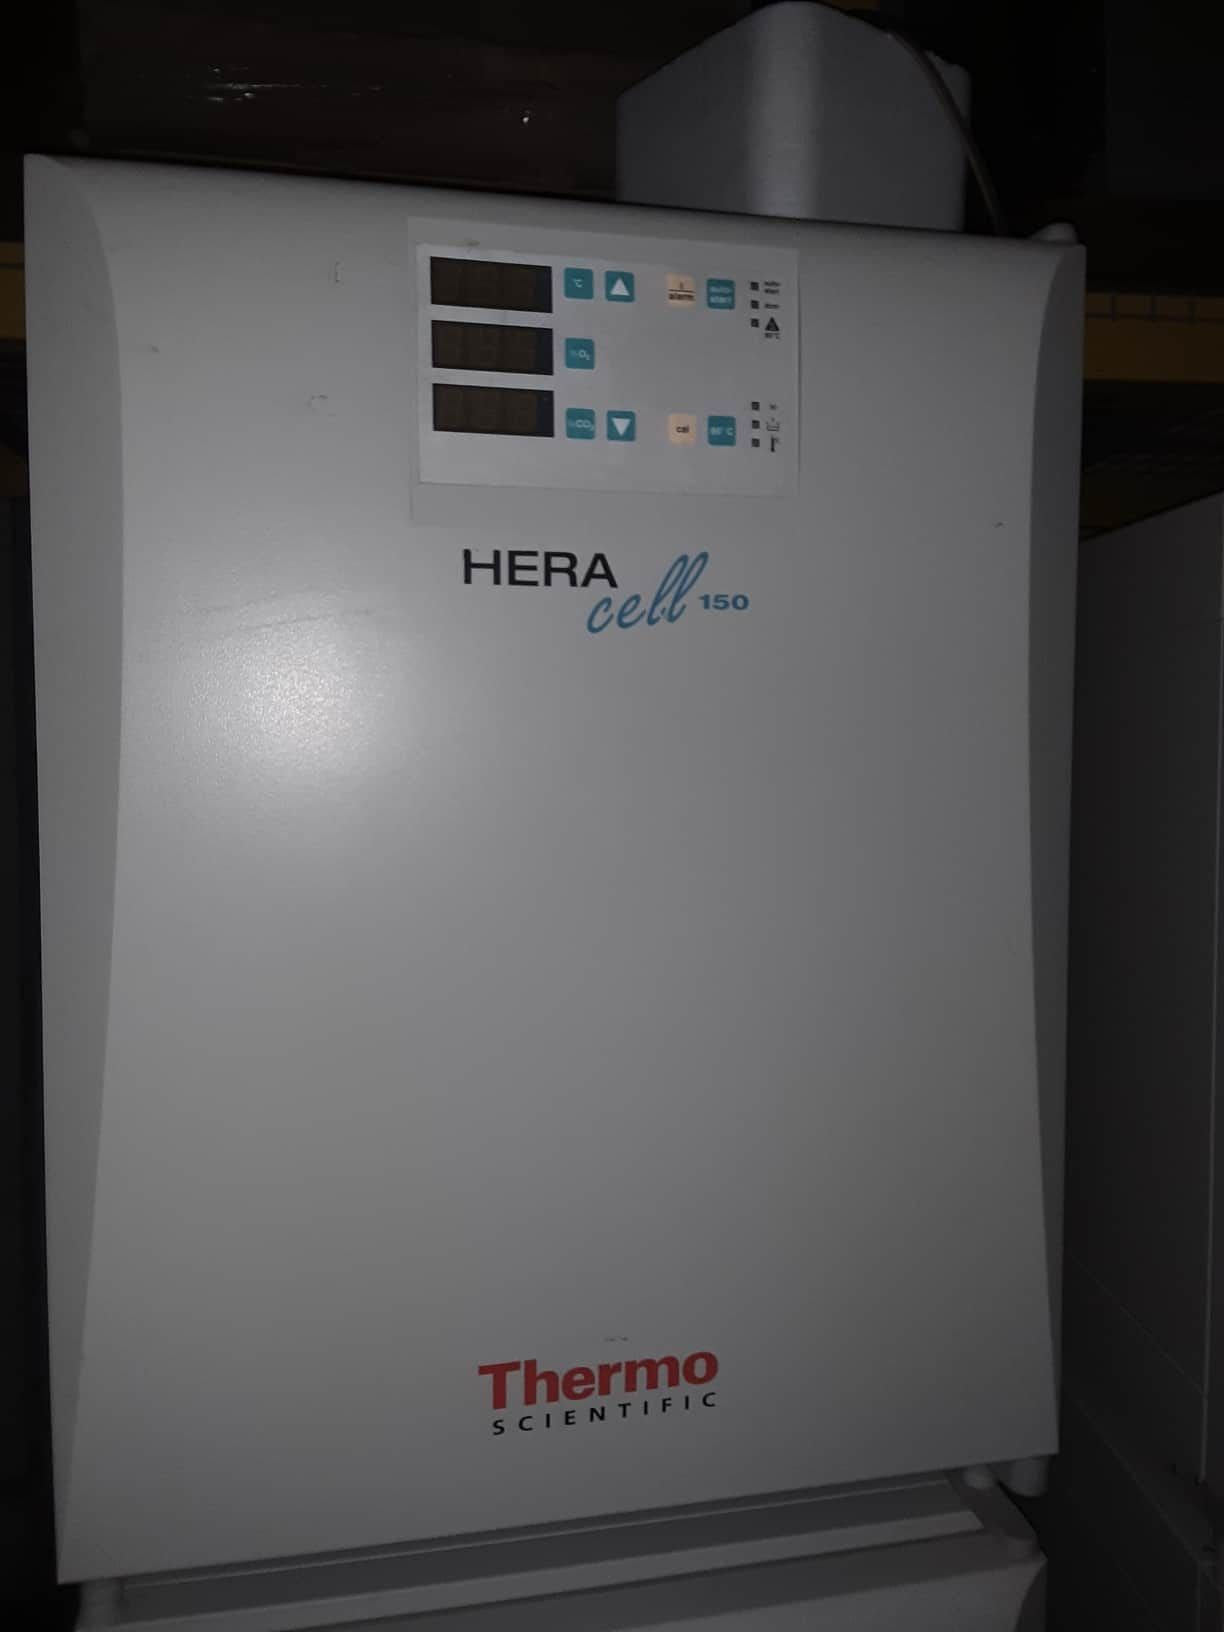 Thermo Heracell 150 tri-gas C02 incubator